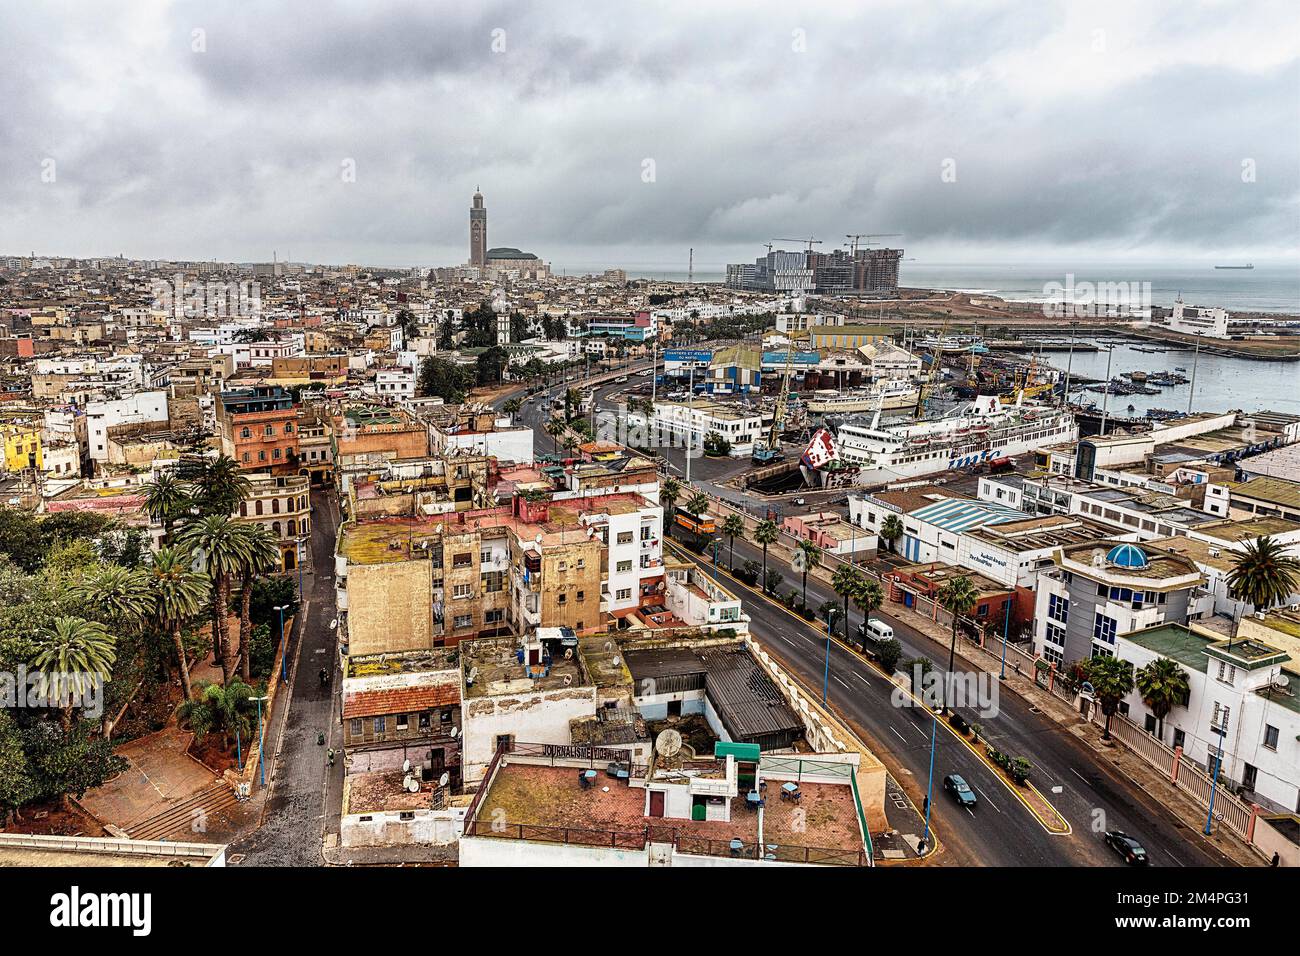 Casablanca skyline, panoramic view with the Hassan II Mosque, dreary weather, view from above, Casablanca, Morocco Stock Photo